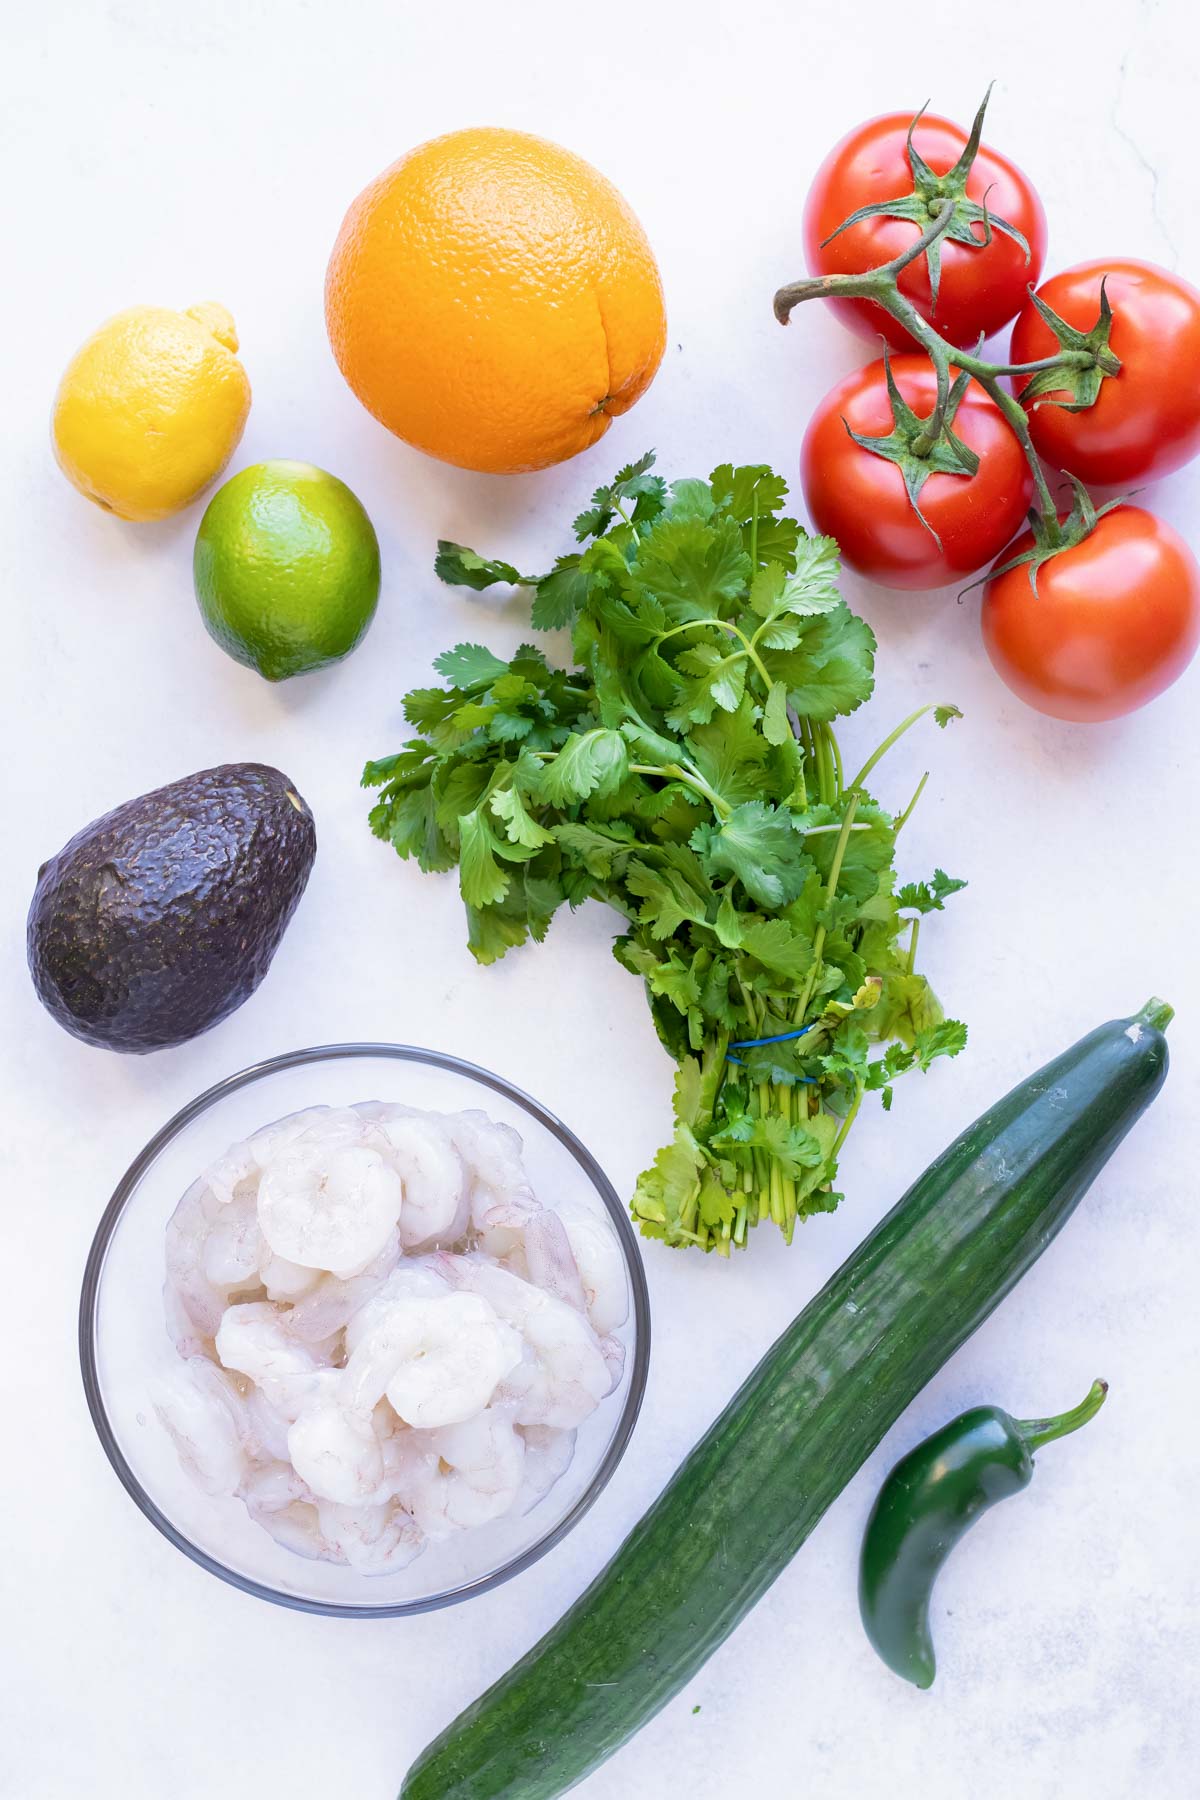 The ingredients for a Mexican shrimp ceviche with avocado and tomatoes.